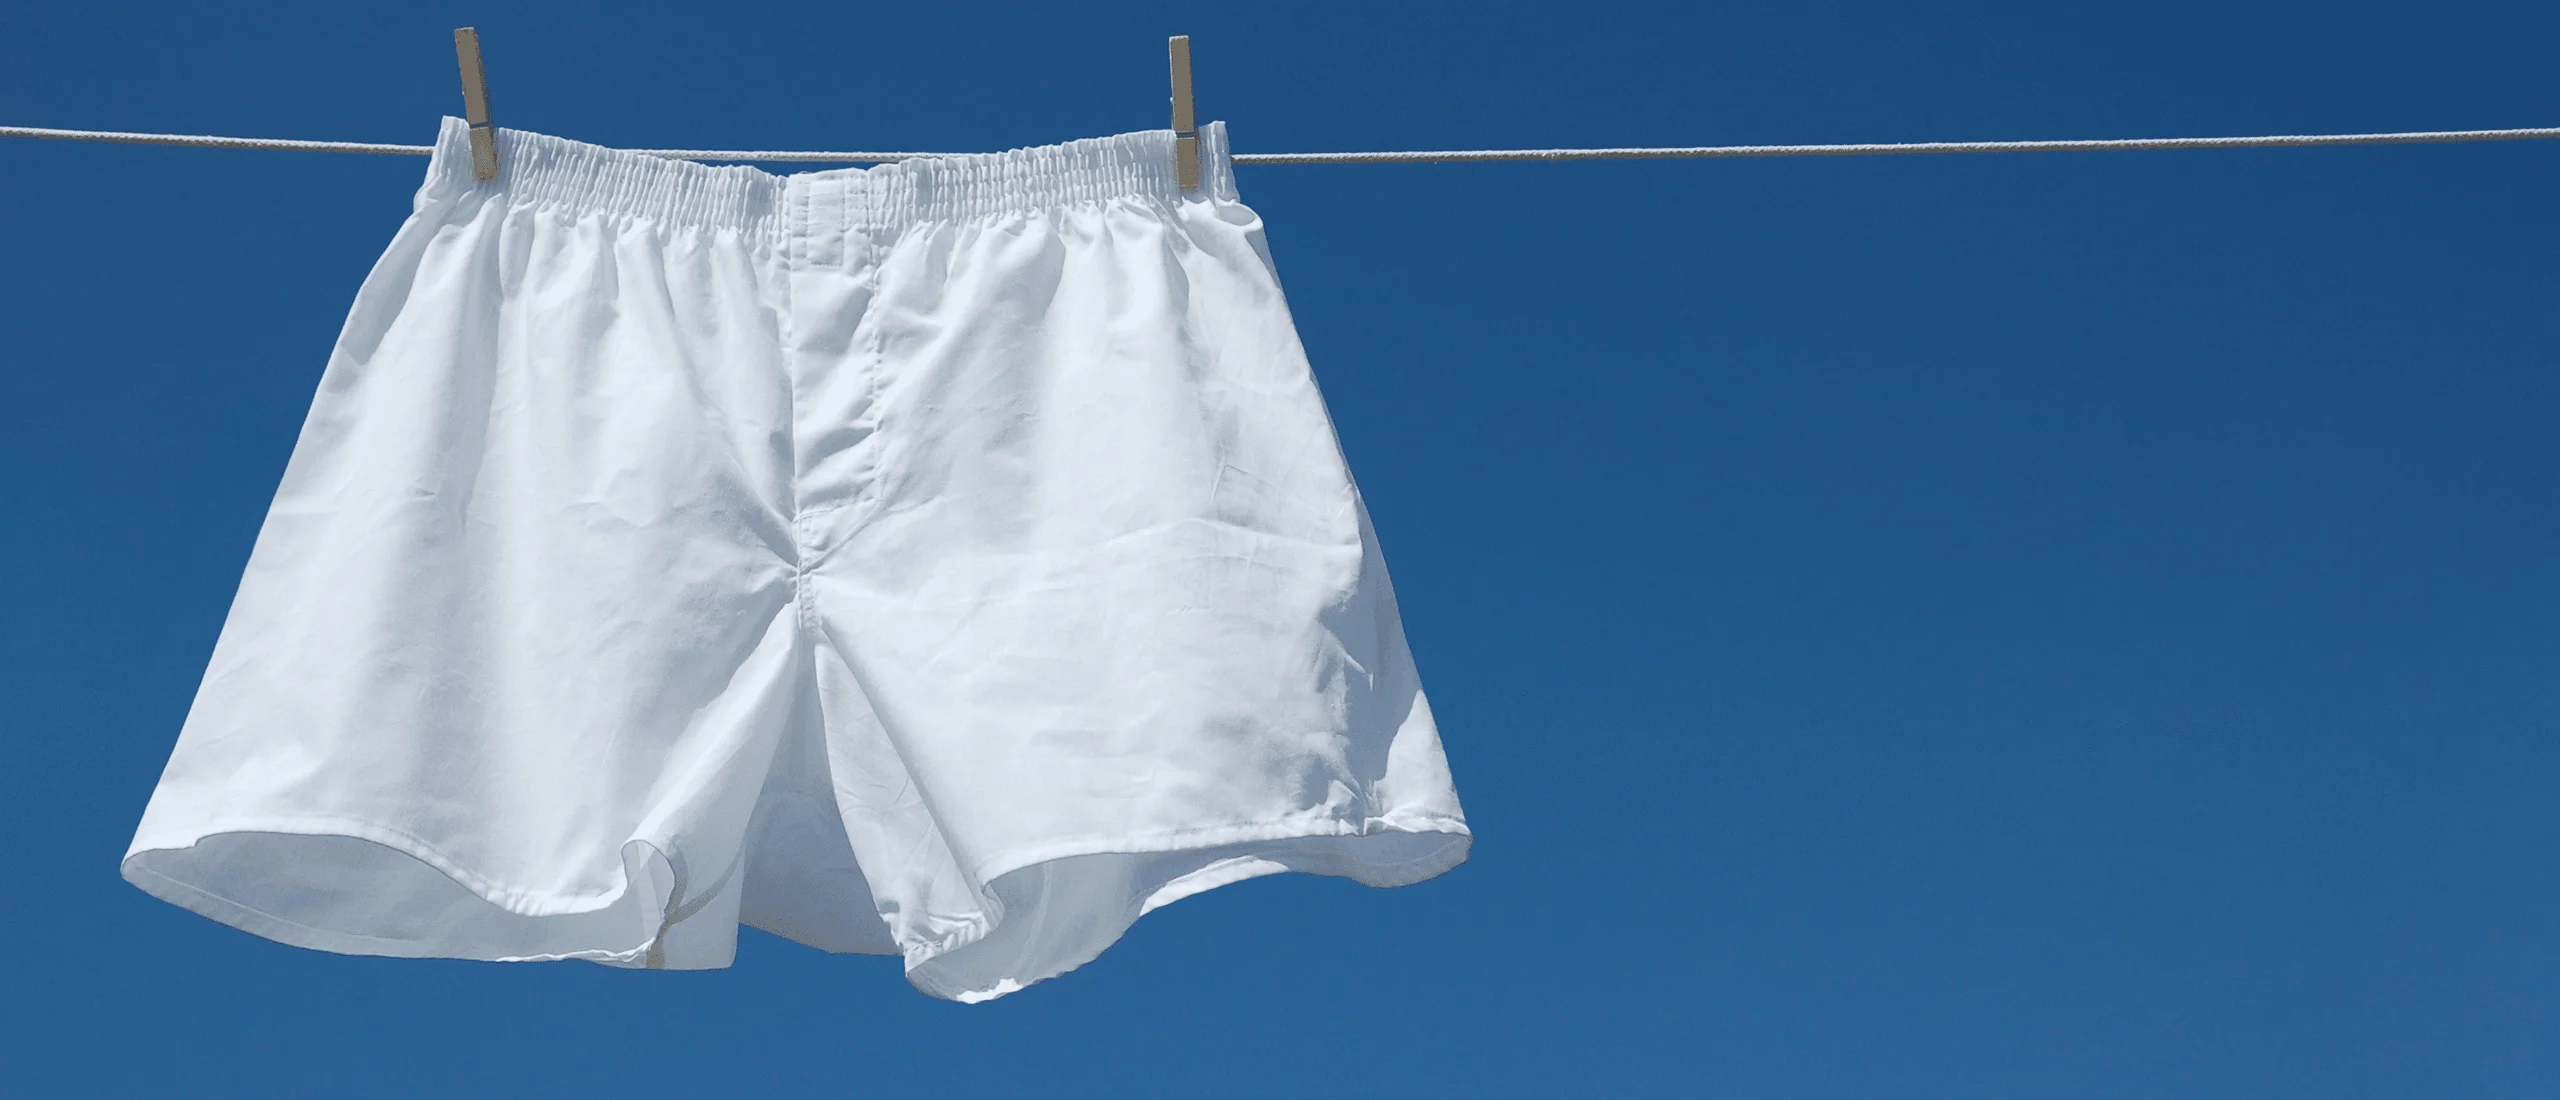 mens white boxers hanging from clothes line